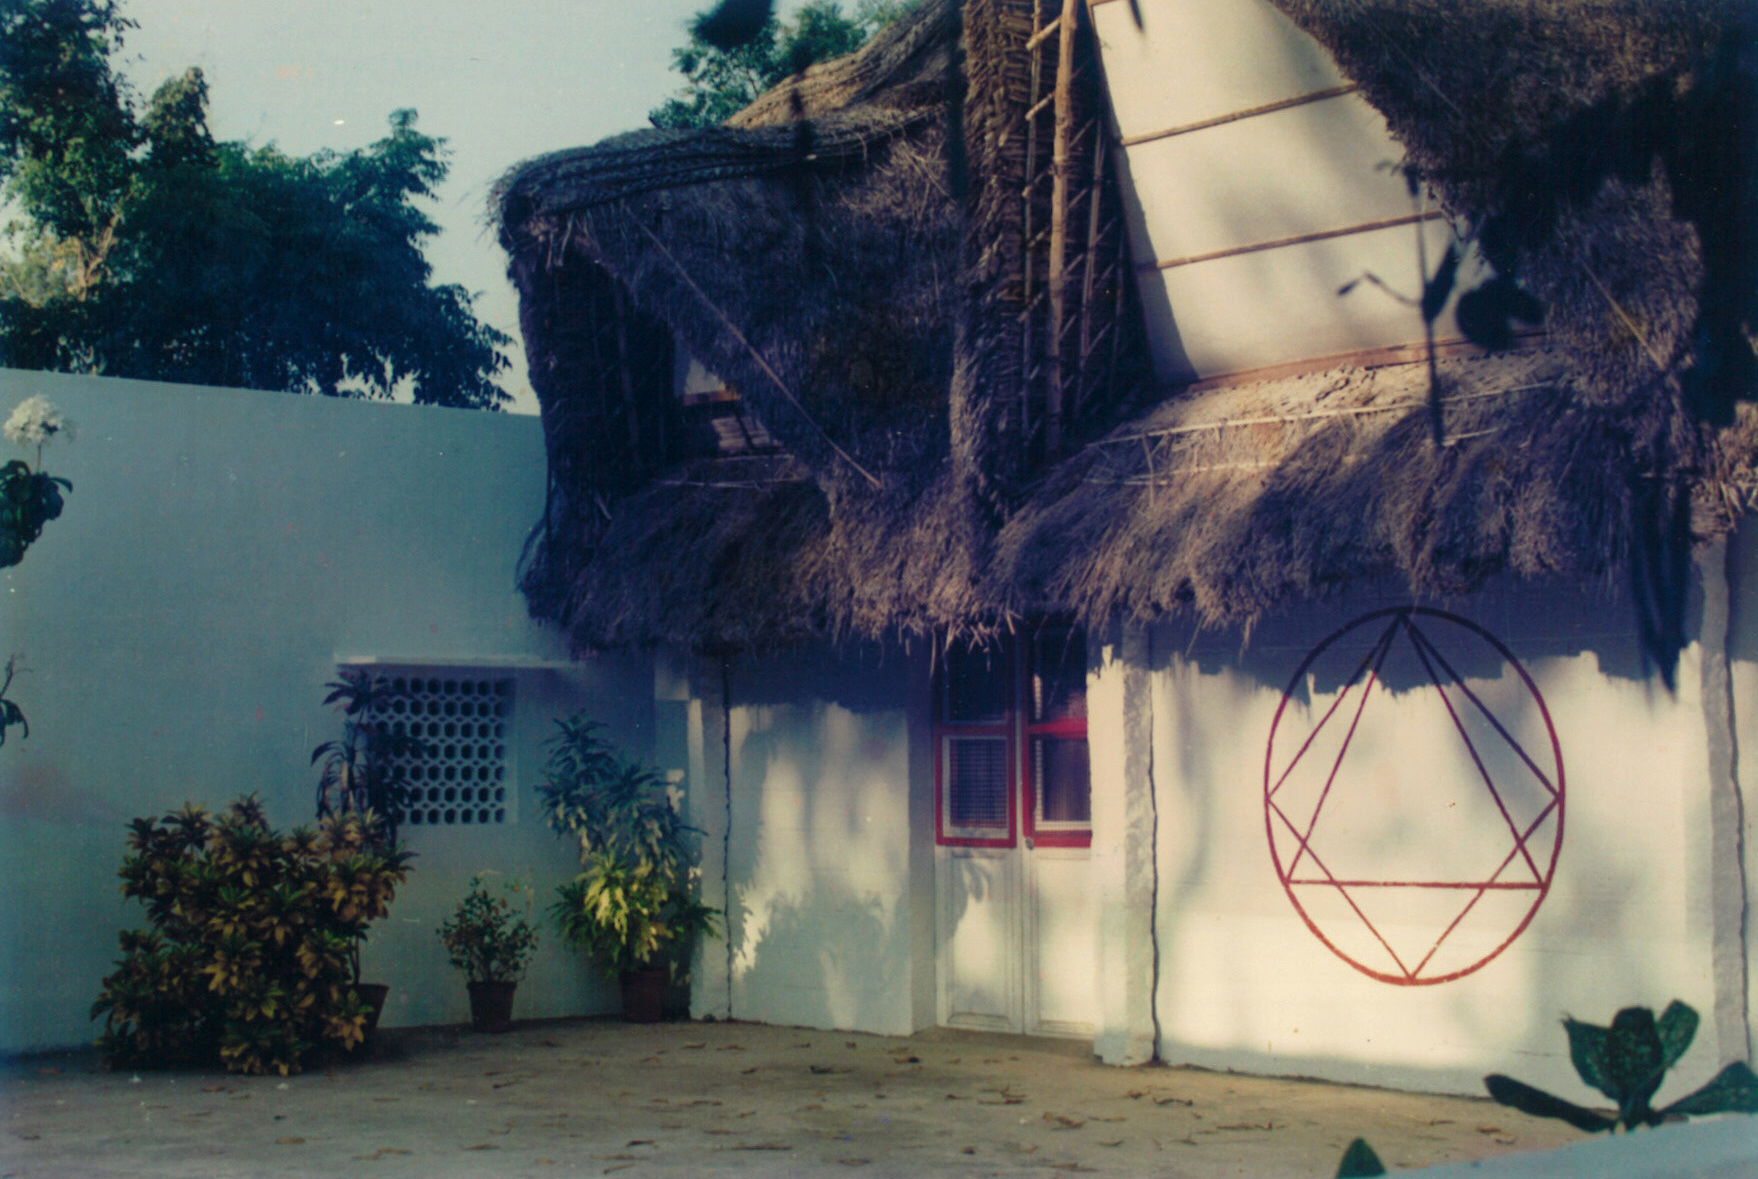 BACK SIDE OF IGOR'S HOUSE IN ASPIRATION-AUROVILLE WITH AN ALIEN WAITING OUTISDE .jpg